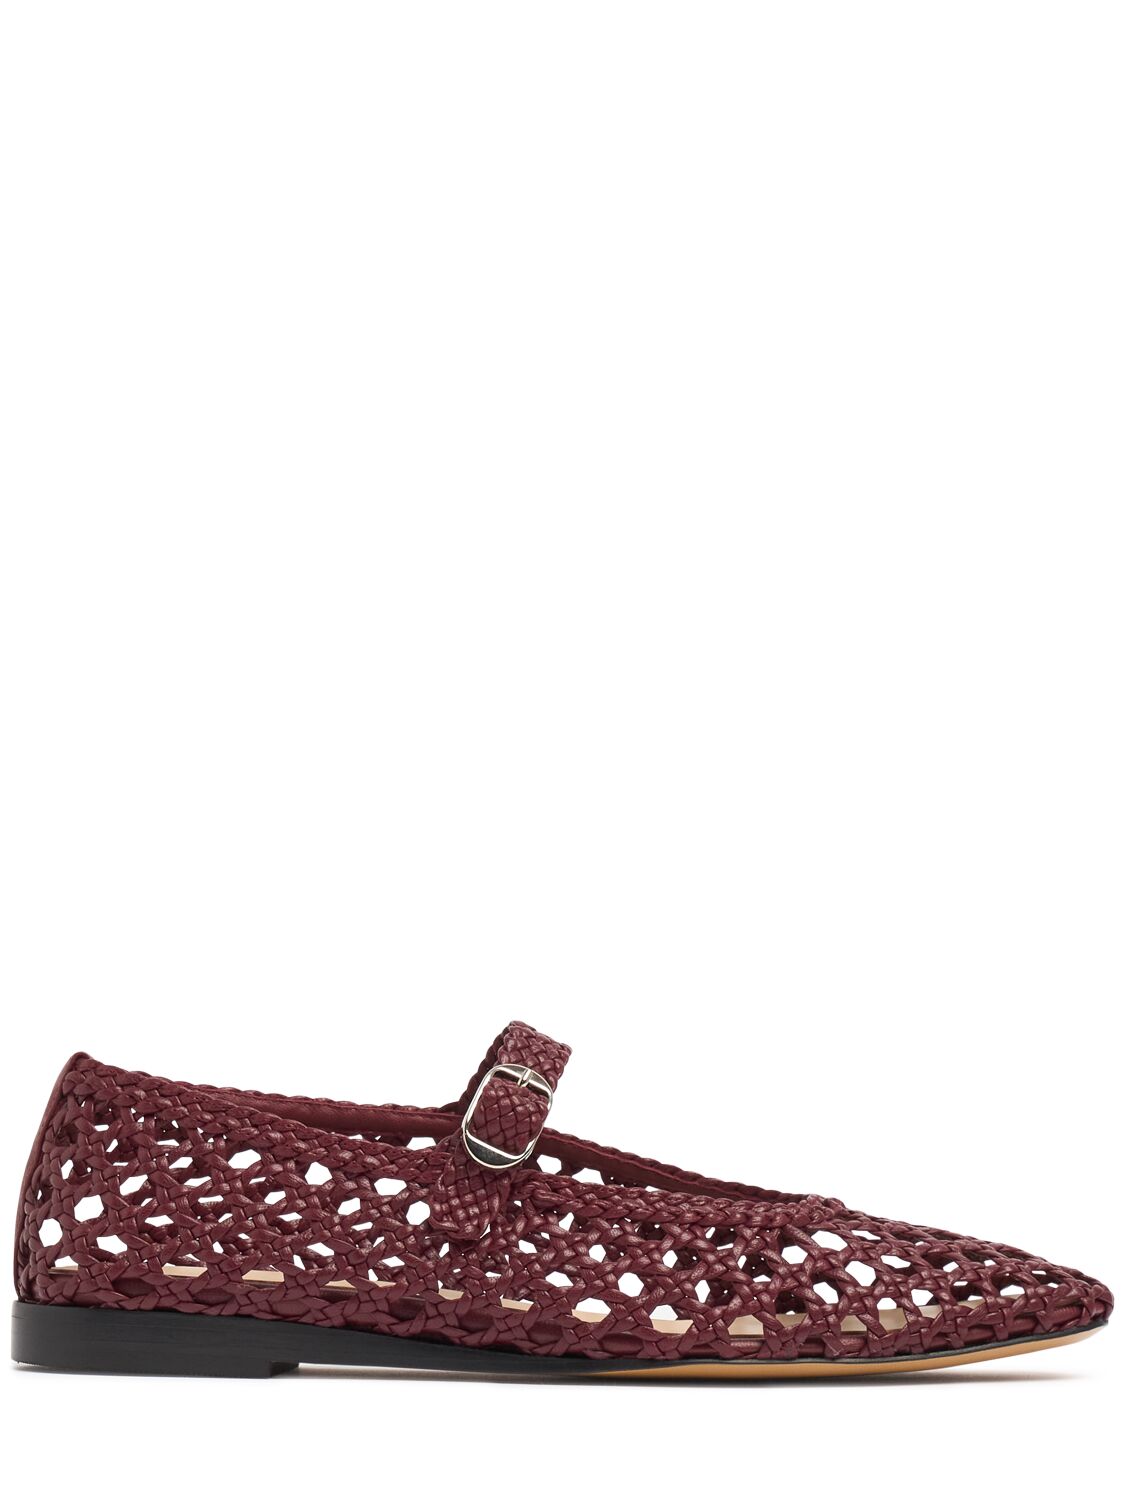 Le Monde Beryl 10mm Woven Leather Mary Jane Flats In Red